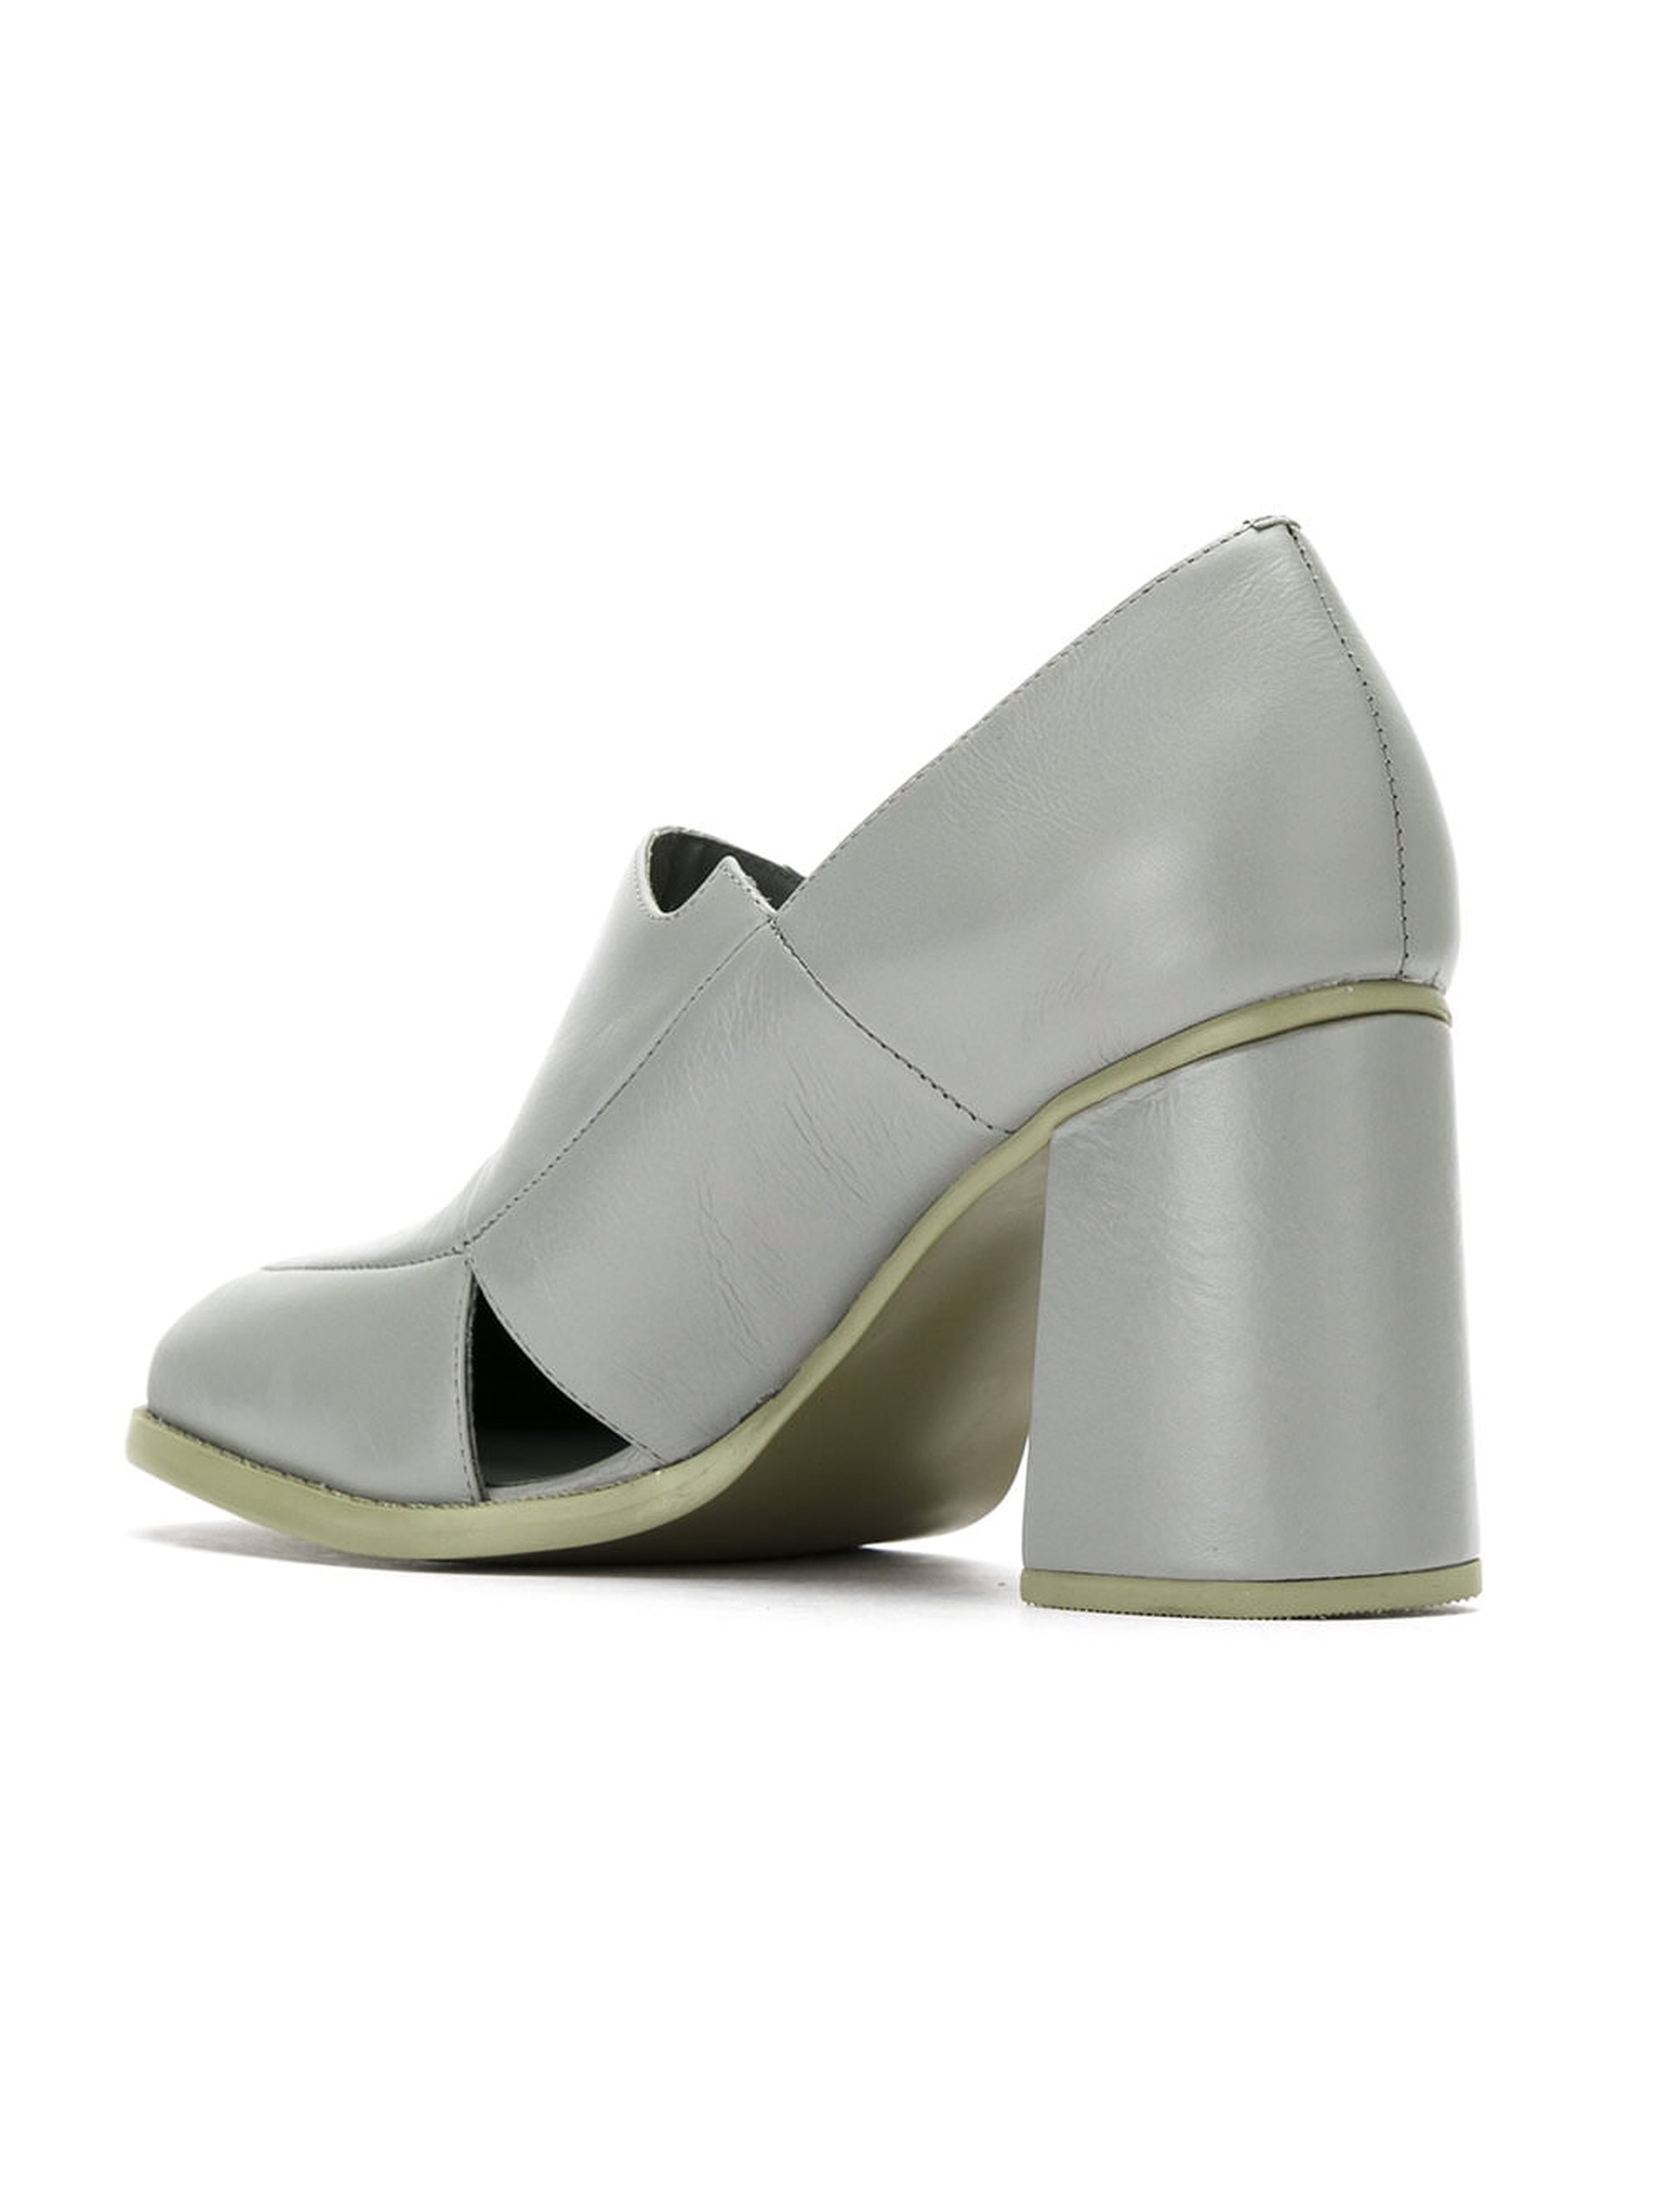 Ankle boot Studio 36 | Studio 36 Ankle Boots